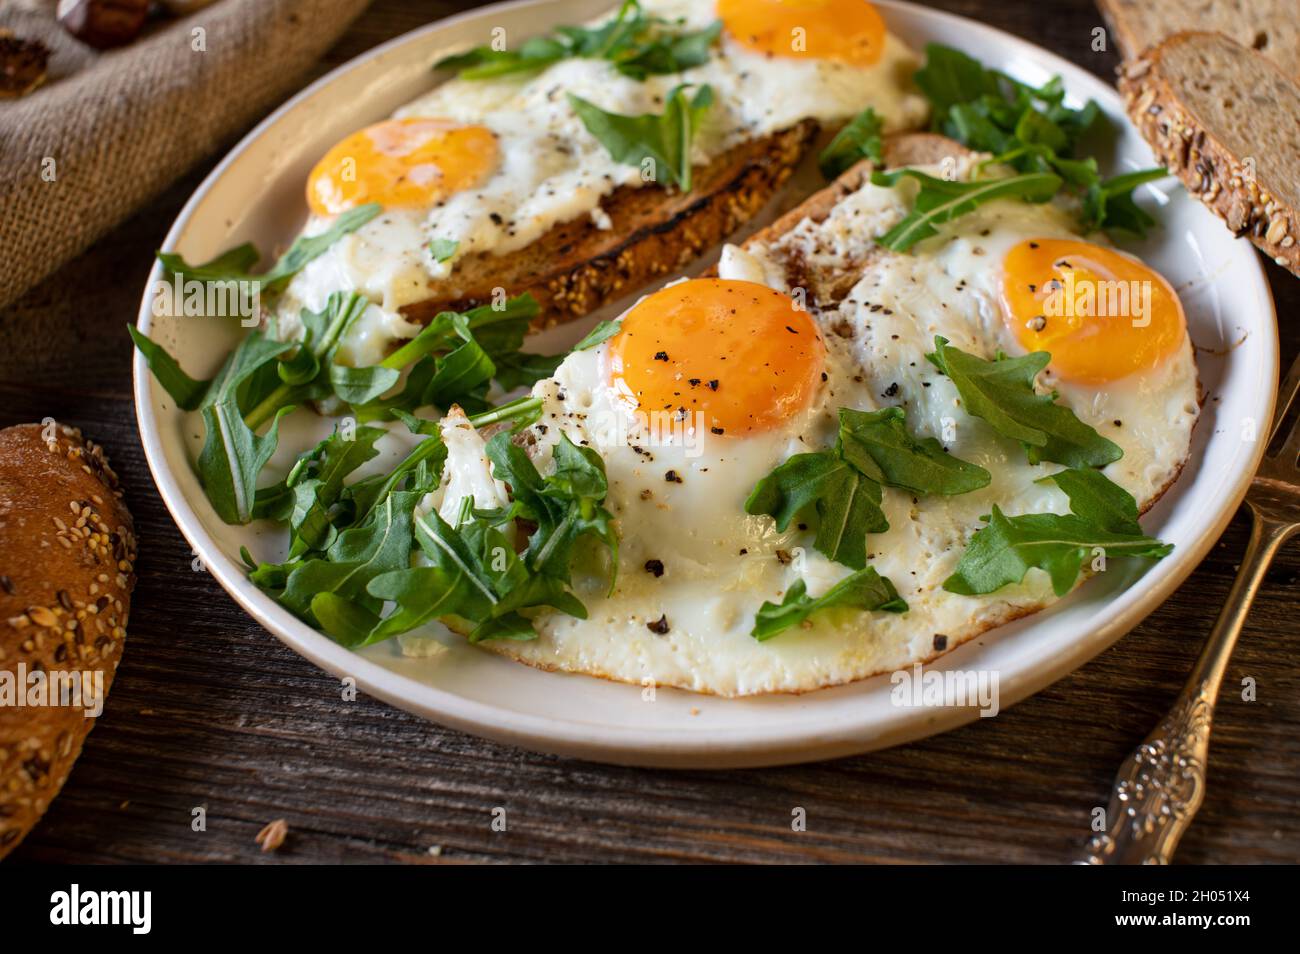 Rustic breakfast with fried eggs, sunny side up, with roasted bread and arugula. Served as a open faced sandwich on a plate on wooden table. Stock Photo